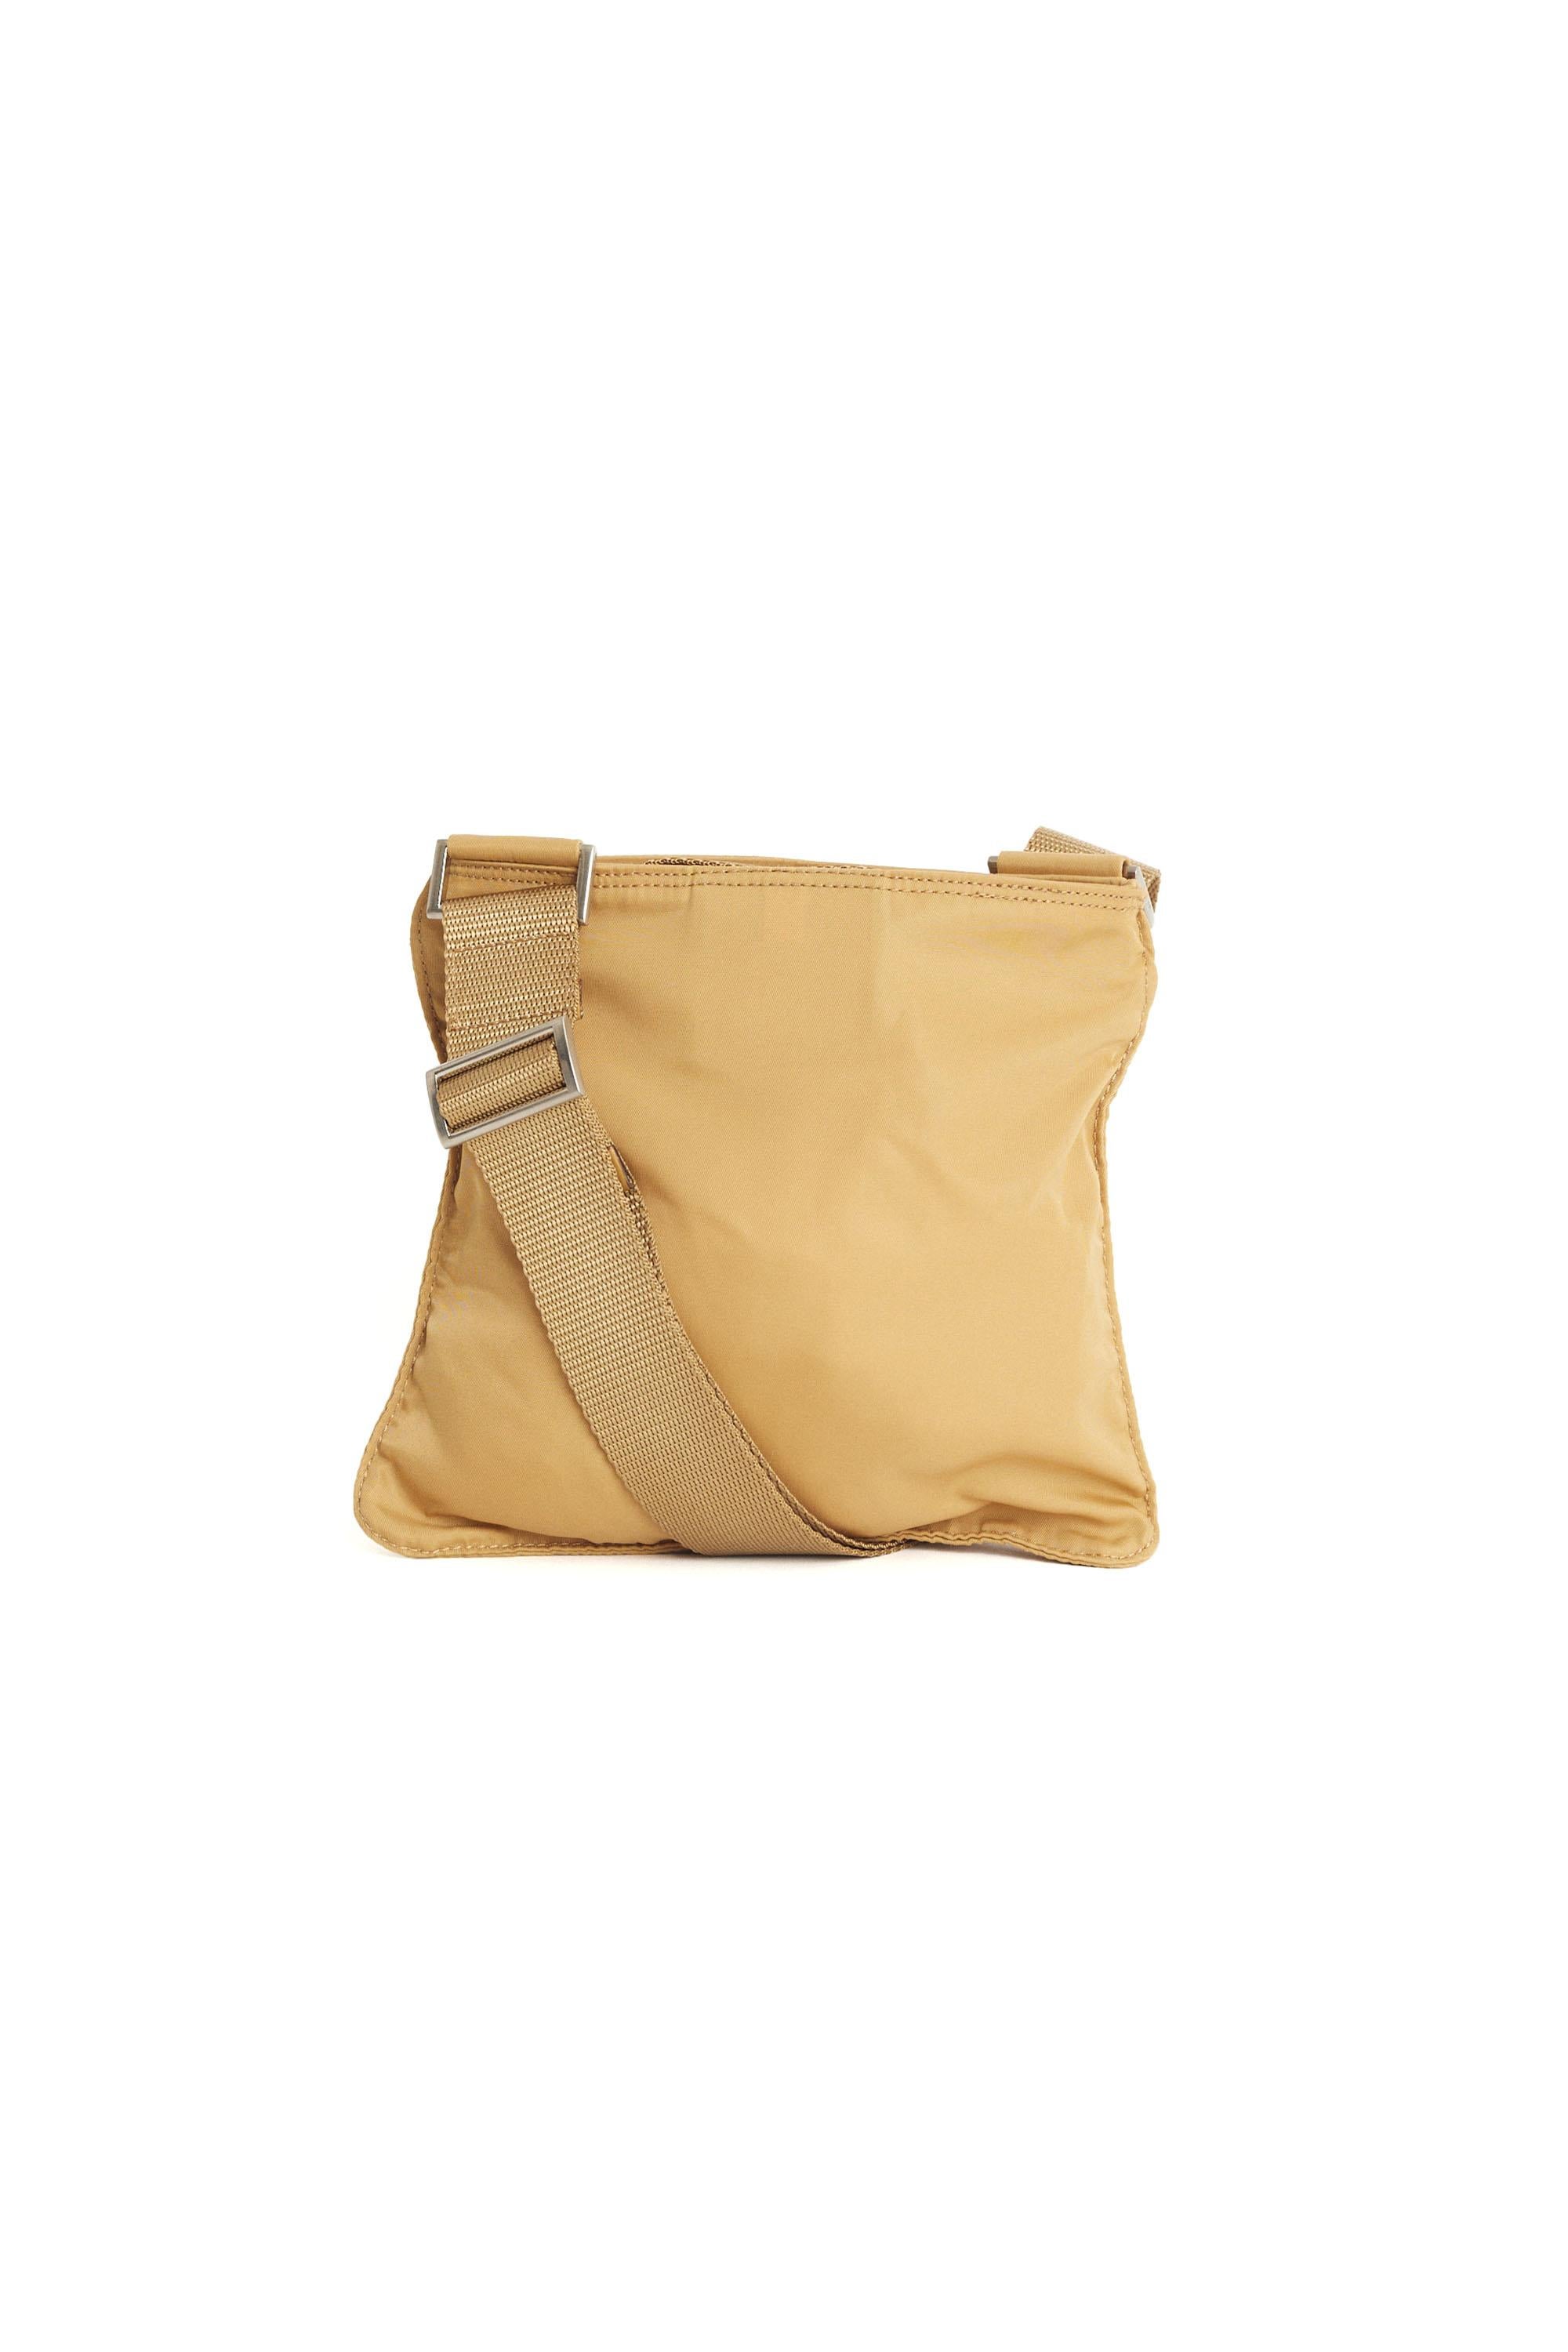 Nordic Poetry is excited to present this Prada Tessuto nylon camel crossbody bag. Features Prada hardware, two compartments and adjustable strap. 
Authenticity guaranteed.

Fabric: Nylon
Dustbag: No
Serial Number: 39
Measurements: Length: 8 inches,